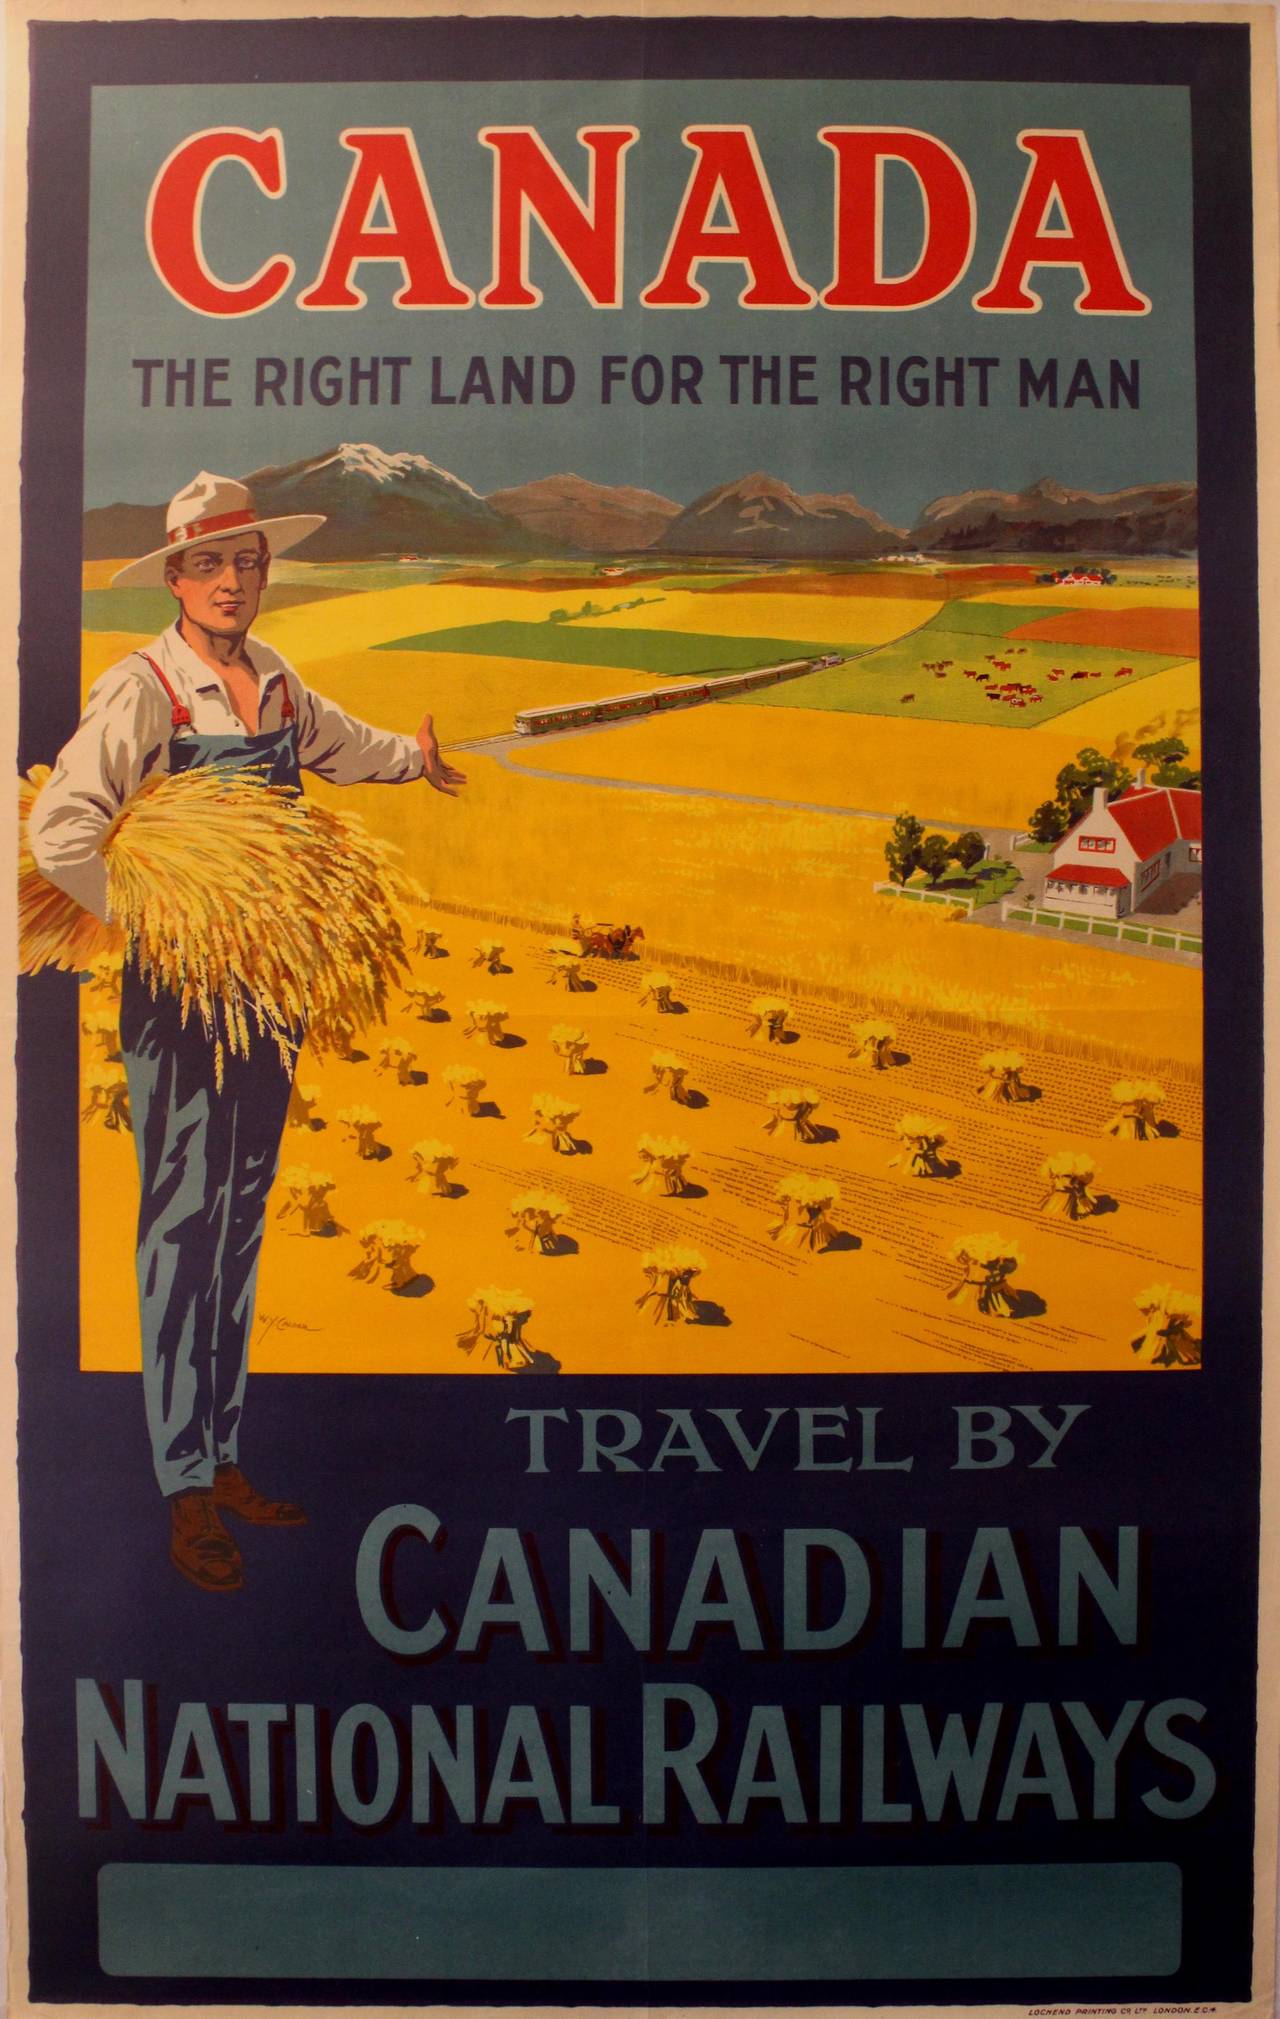 W Y Calder Print - Original Vintage Railway Travel Poster: Canada, The Right Land For The Right Man